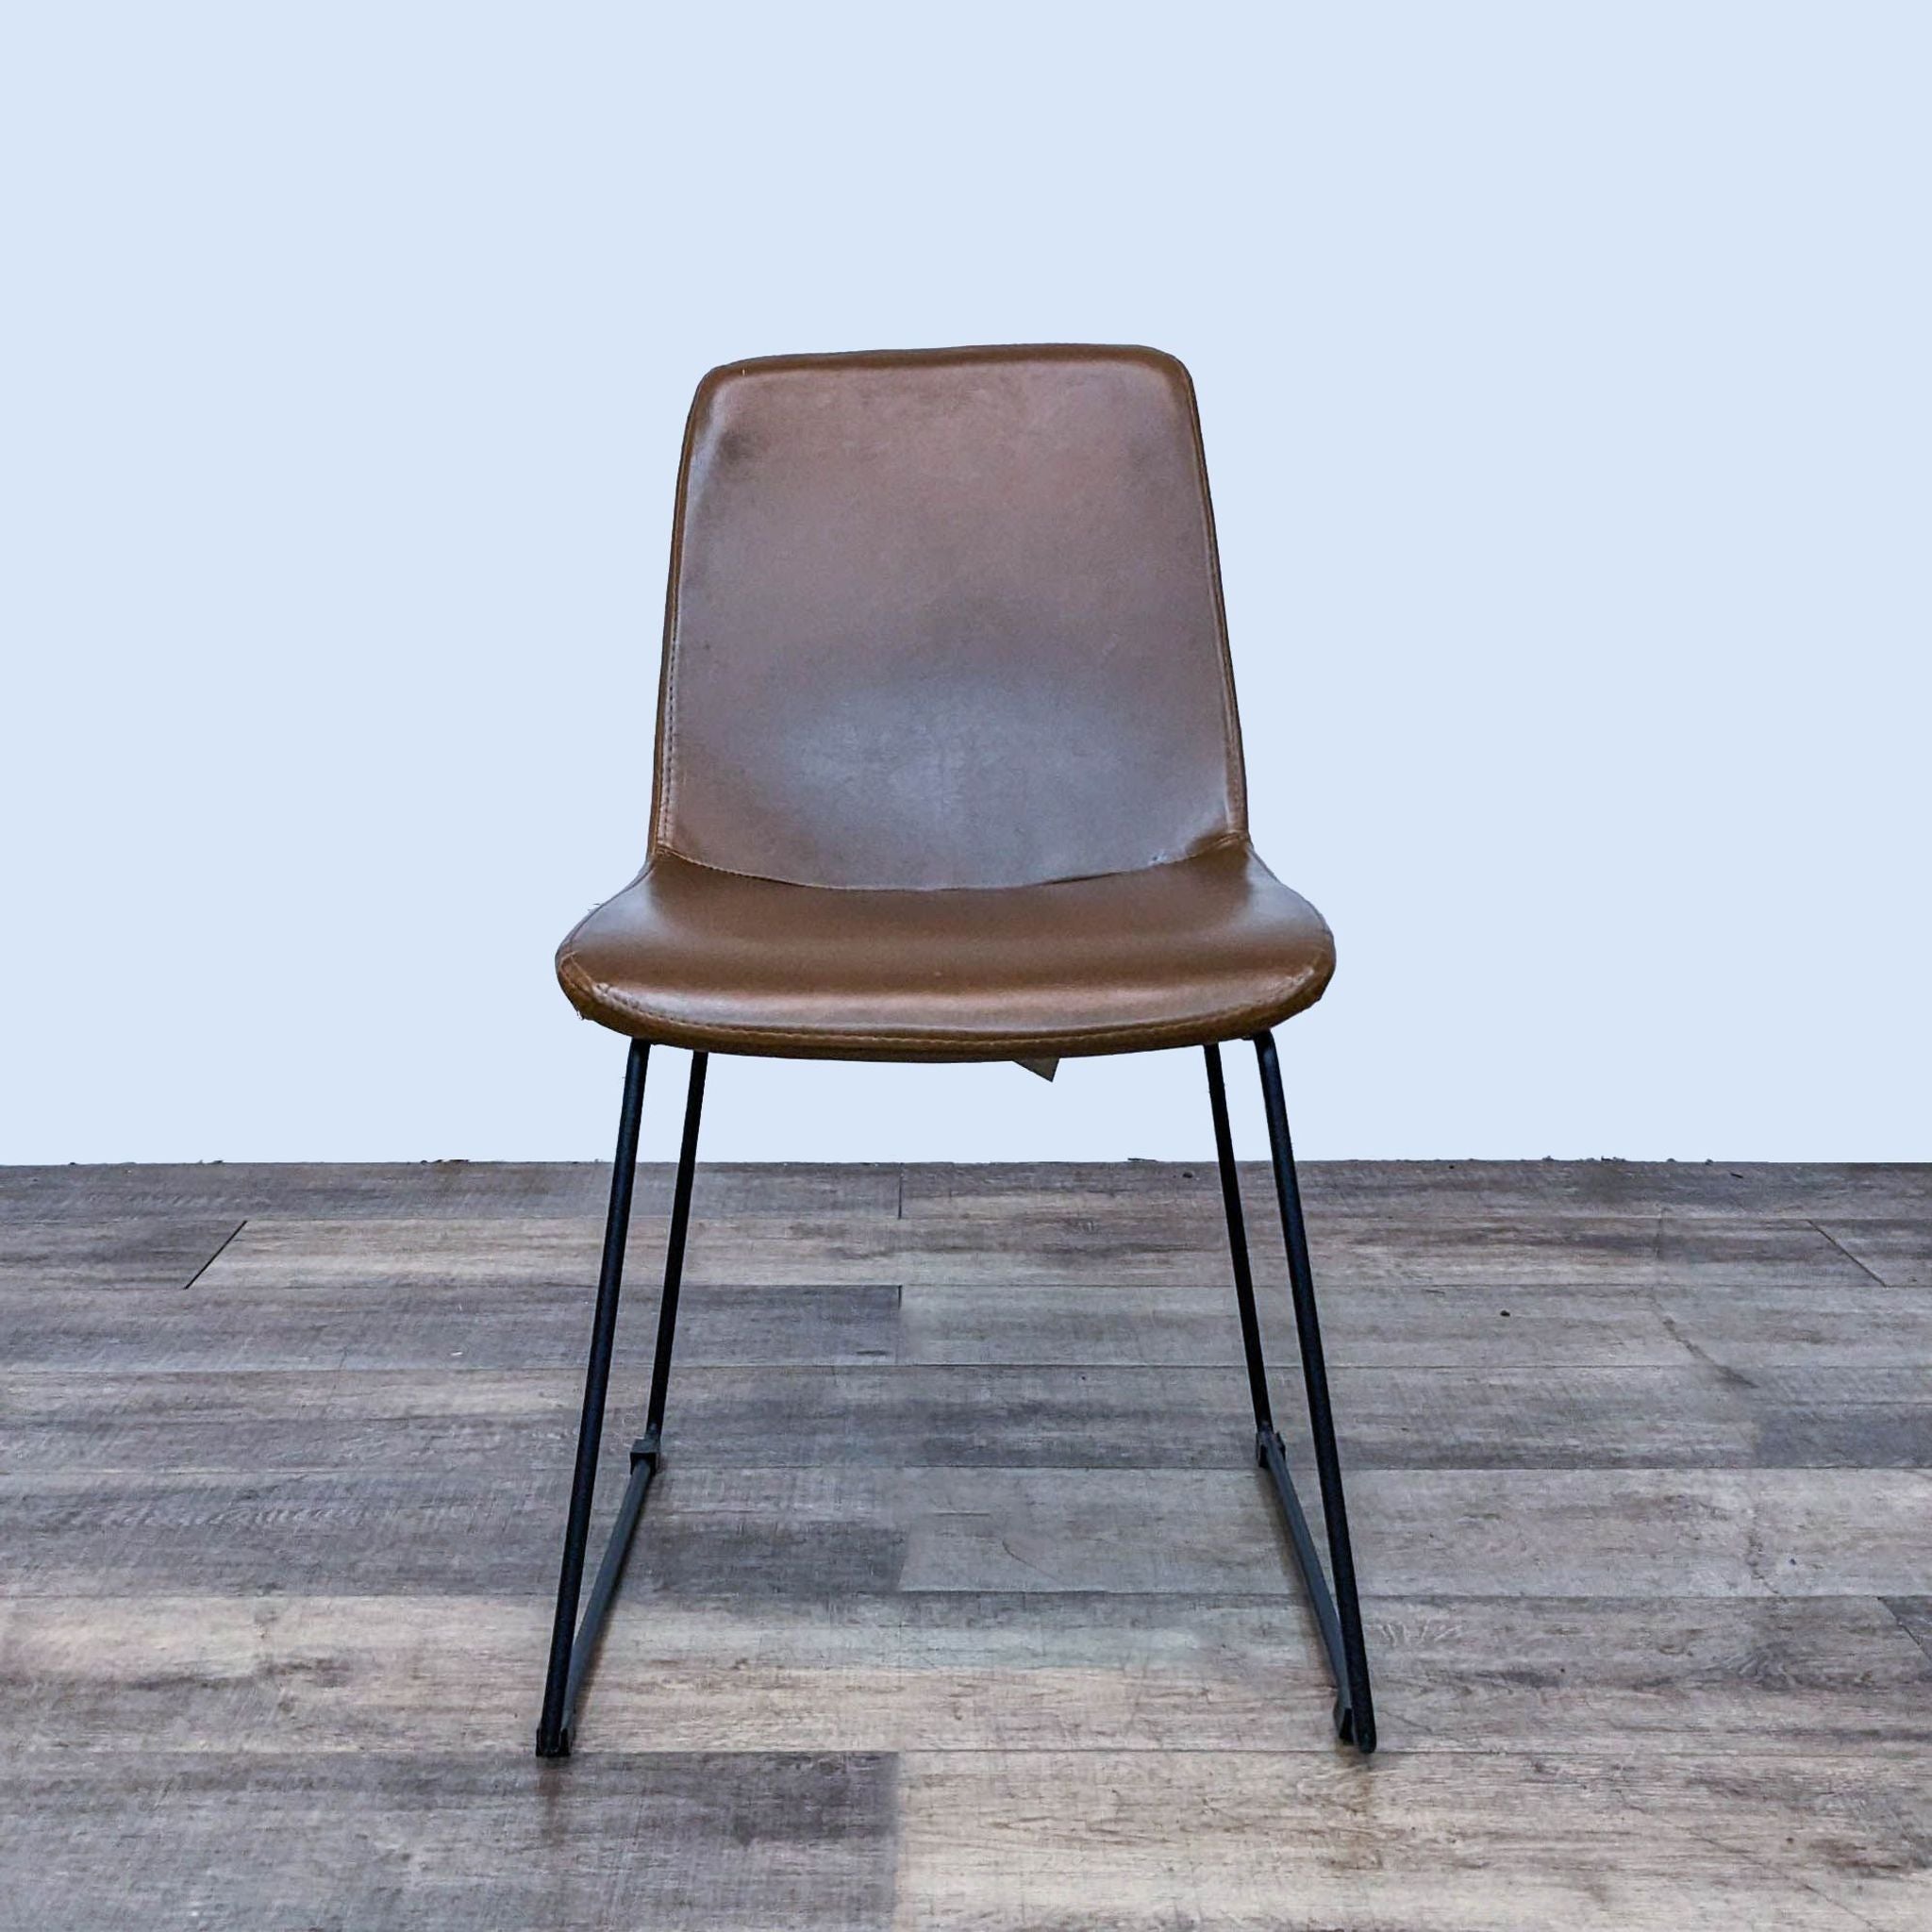 Alt text 1: Modway Invite dining side chair with brown faux leather and a black steel sled base on a wooden floor.